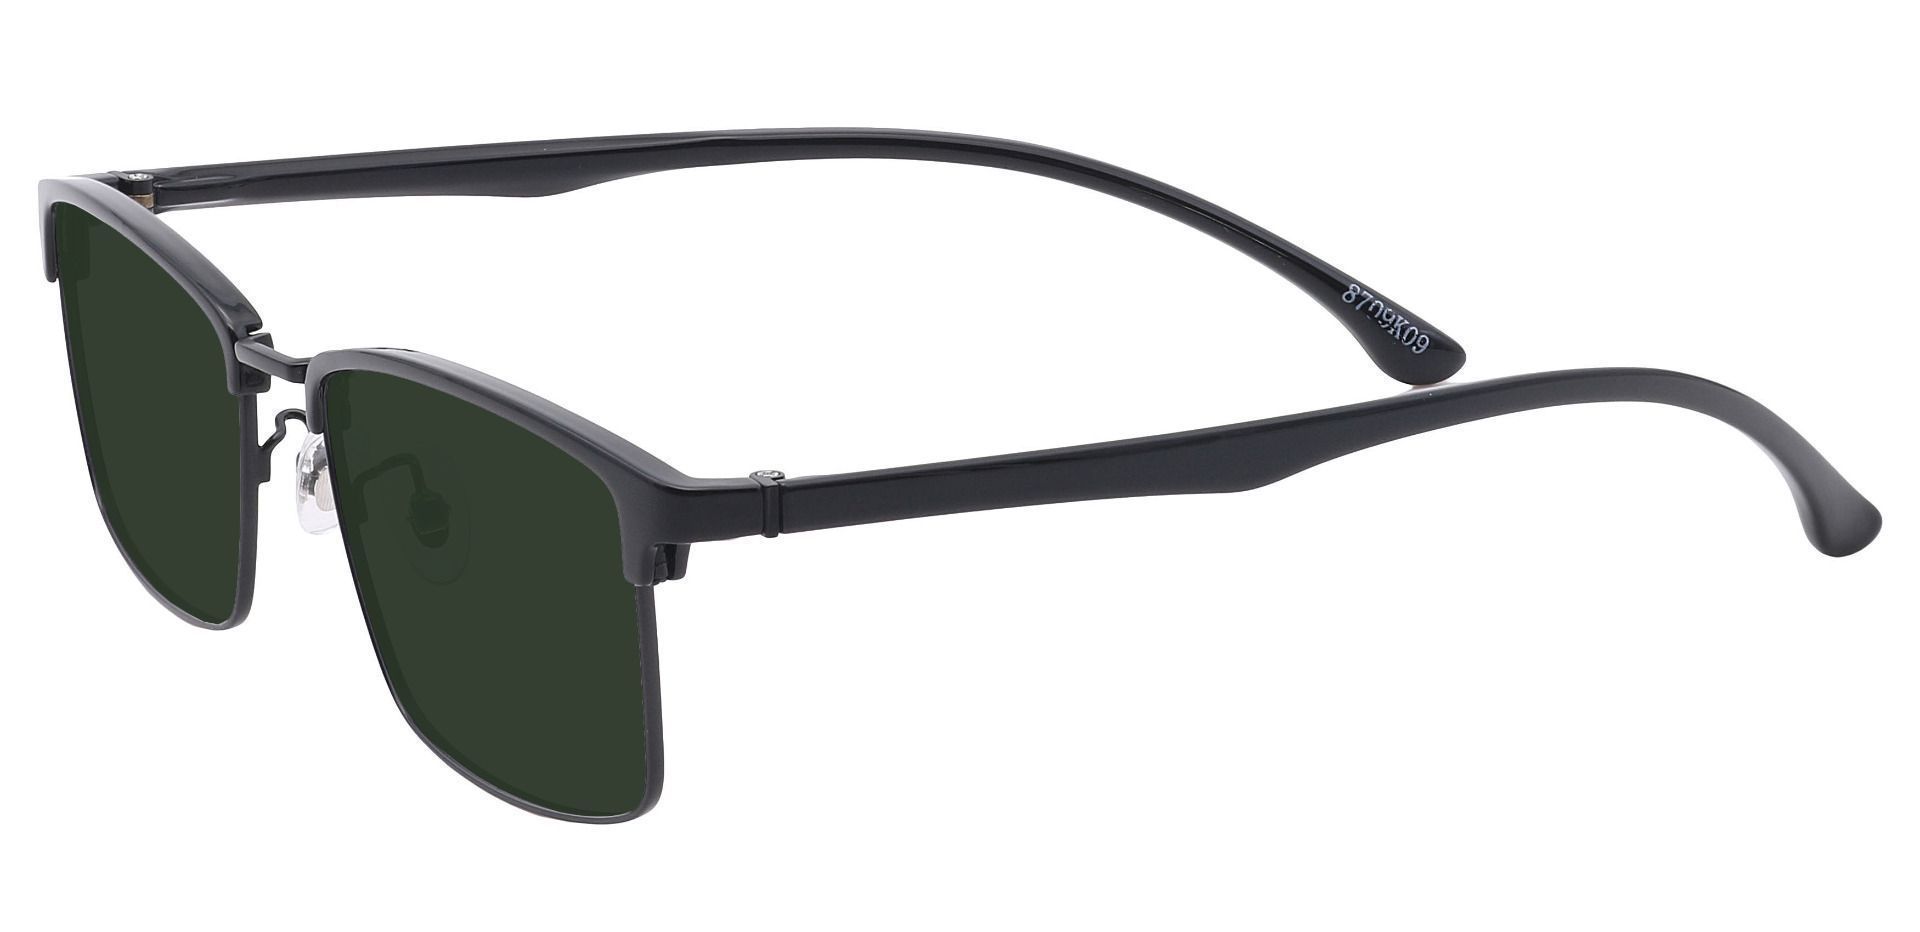 Young Browline Progressive Sunglasses - Black Frame With Green Lenses